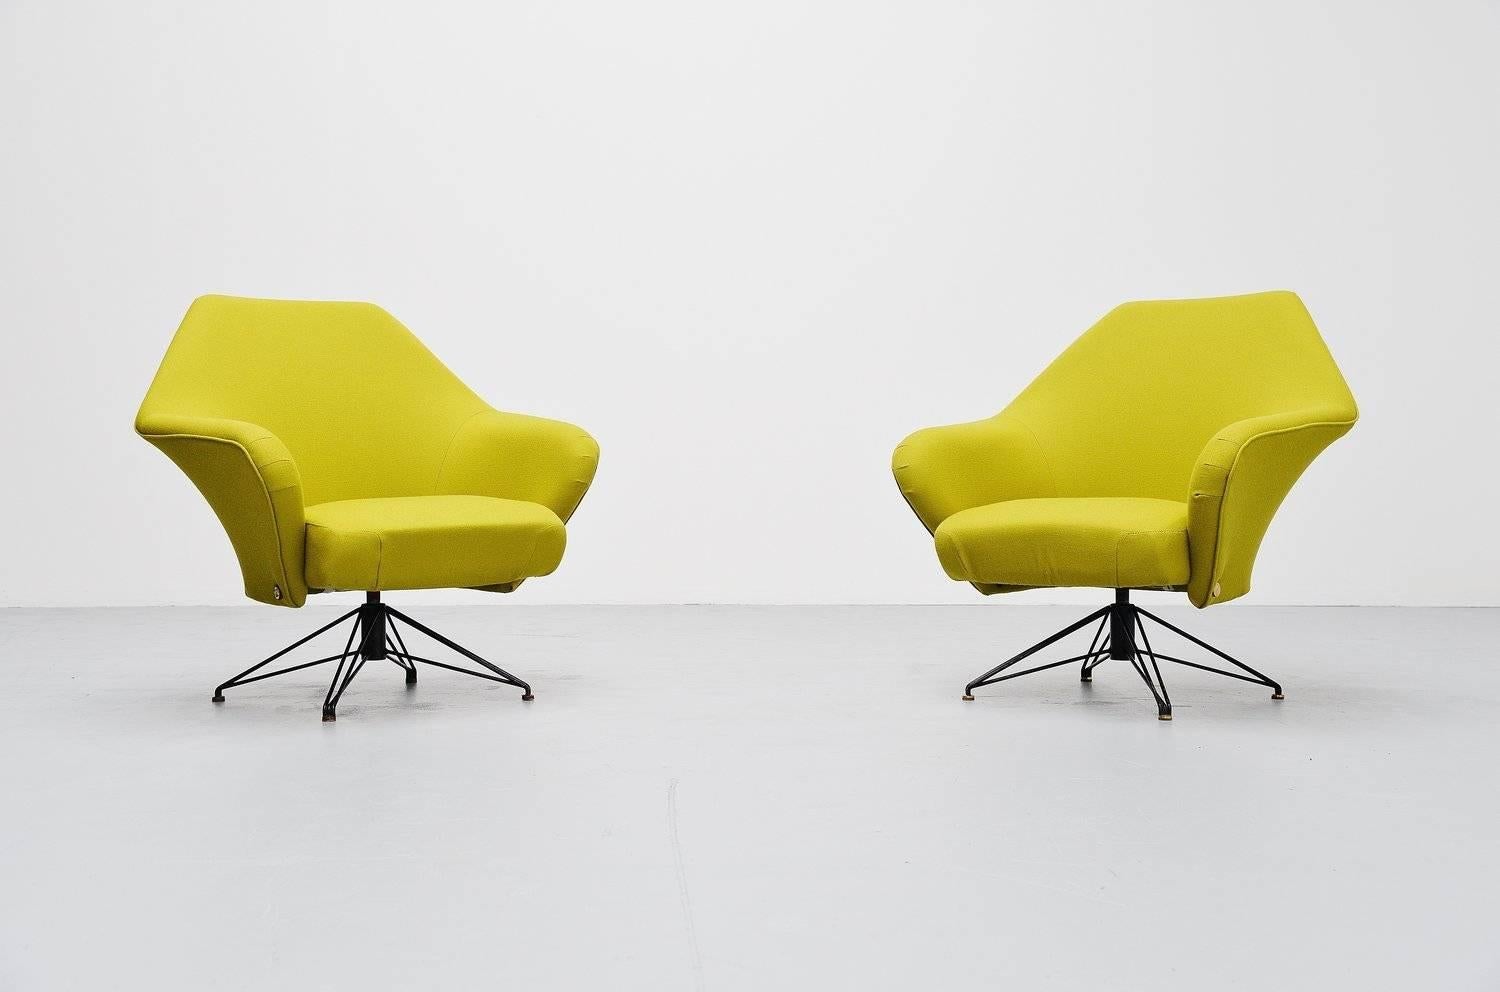 Rare early edition of the P32 chairs designed by Osvaldo Borsani for Tecno, Italy, 1956. These chairs were produced from 1956-1962 and these chairs are from the first production until they changed the base. These chairs swivel and tilt back and work